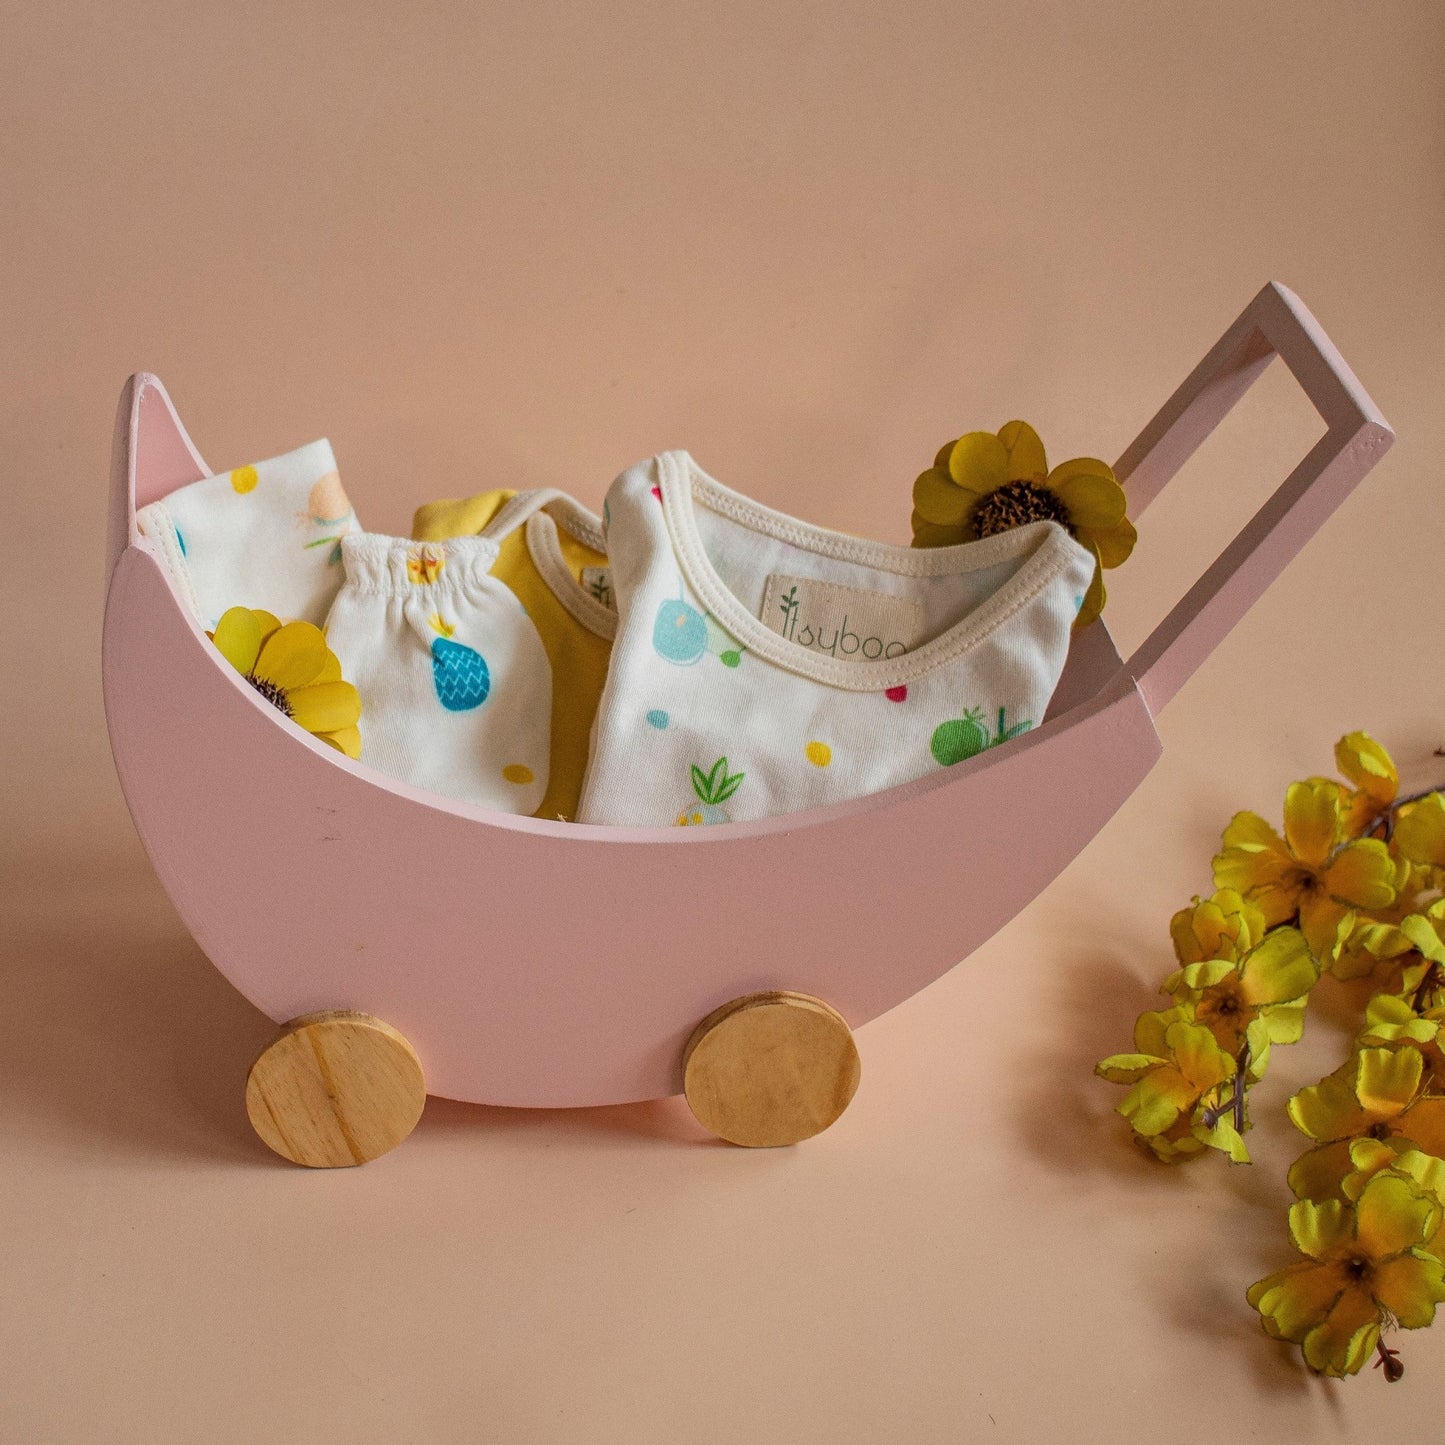 Baby Cot Basket For Baby Shower Gifitng - Ebony WoodcraftsConcept Gifting Bases